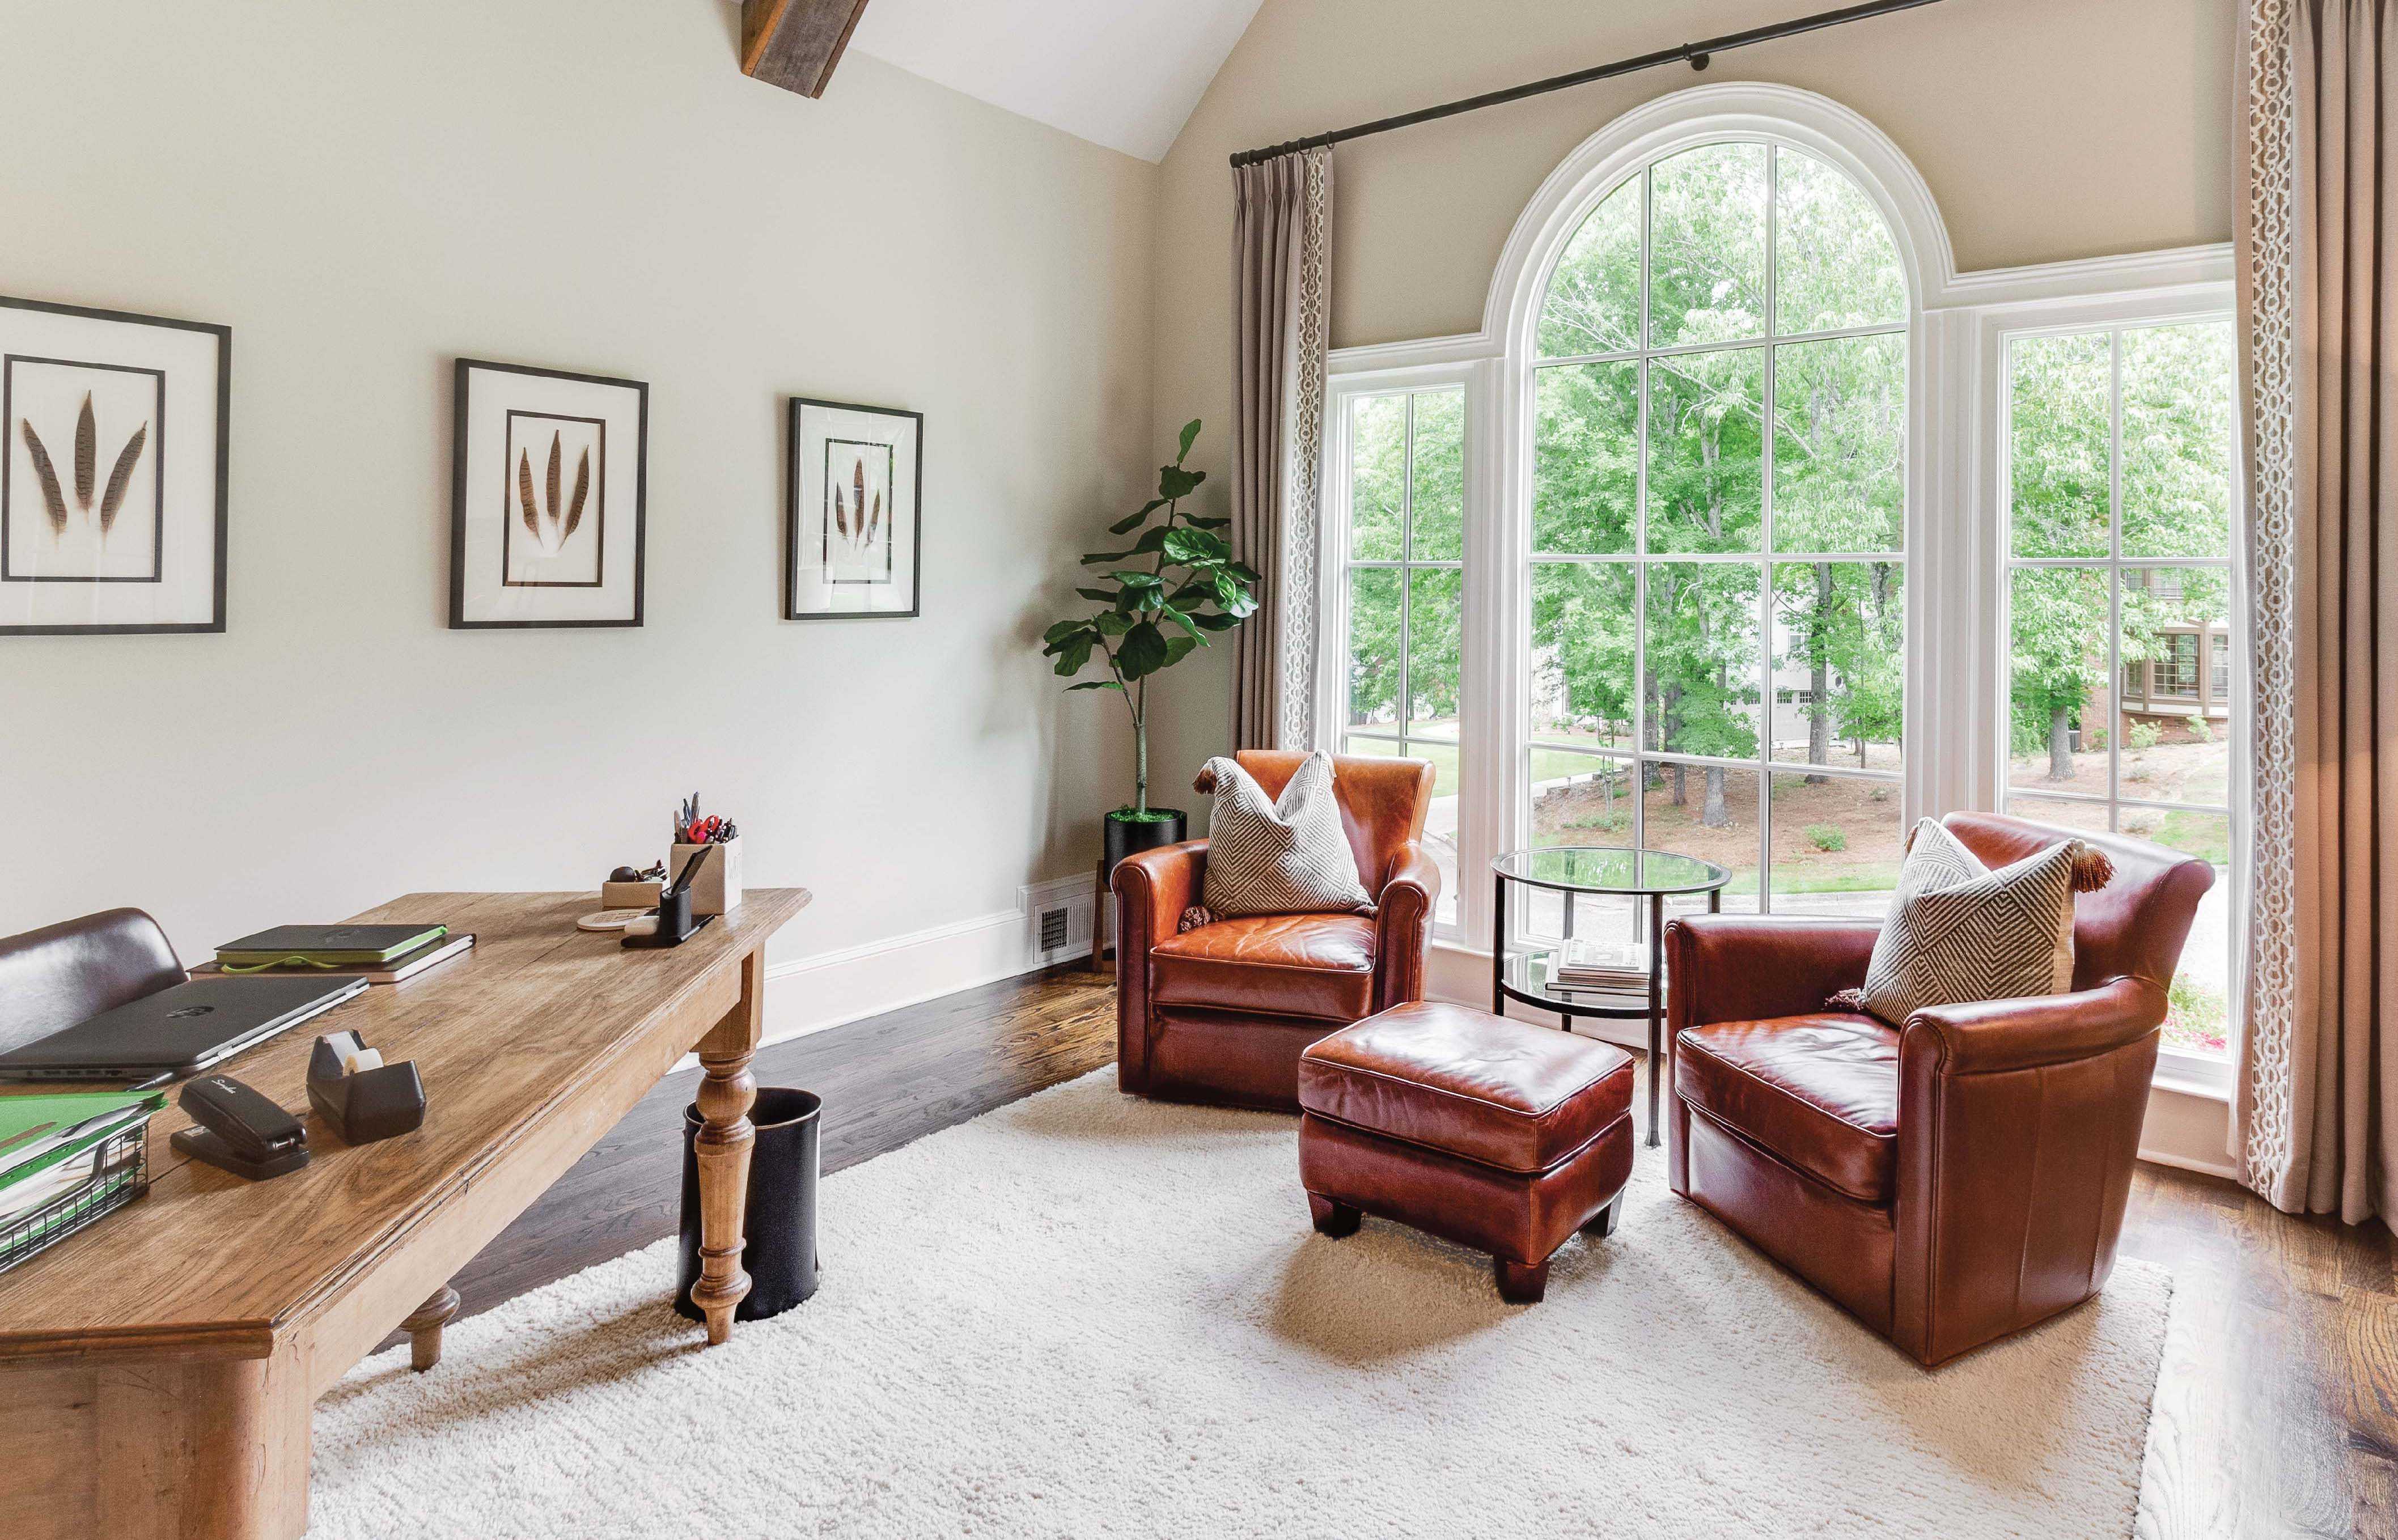 Interior family room image featuring a Round Top Window and Casement Windows.